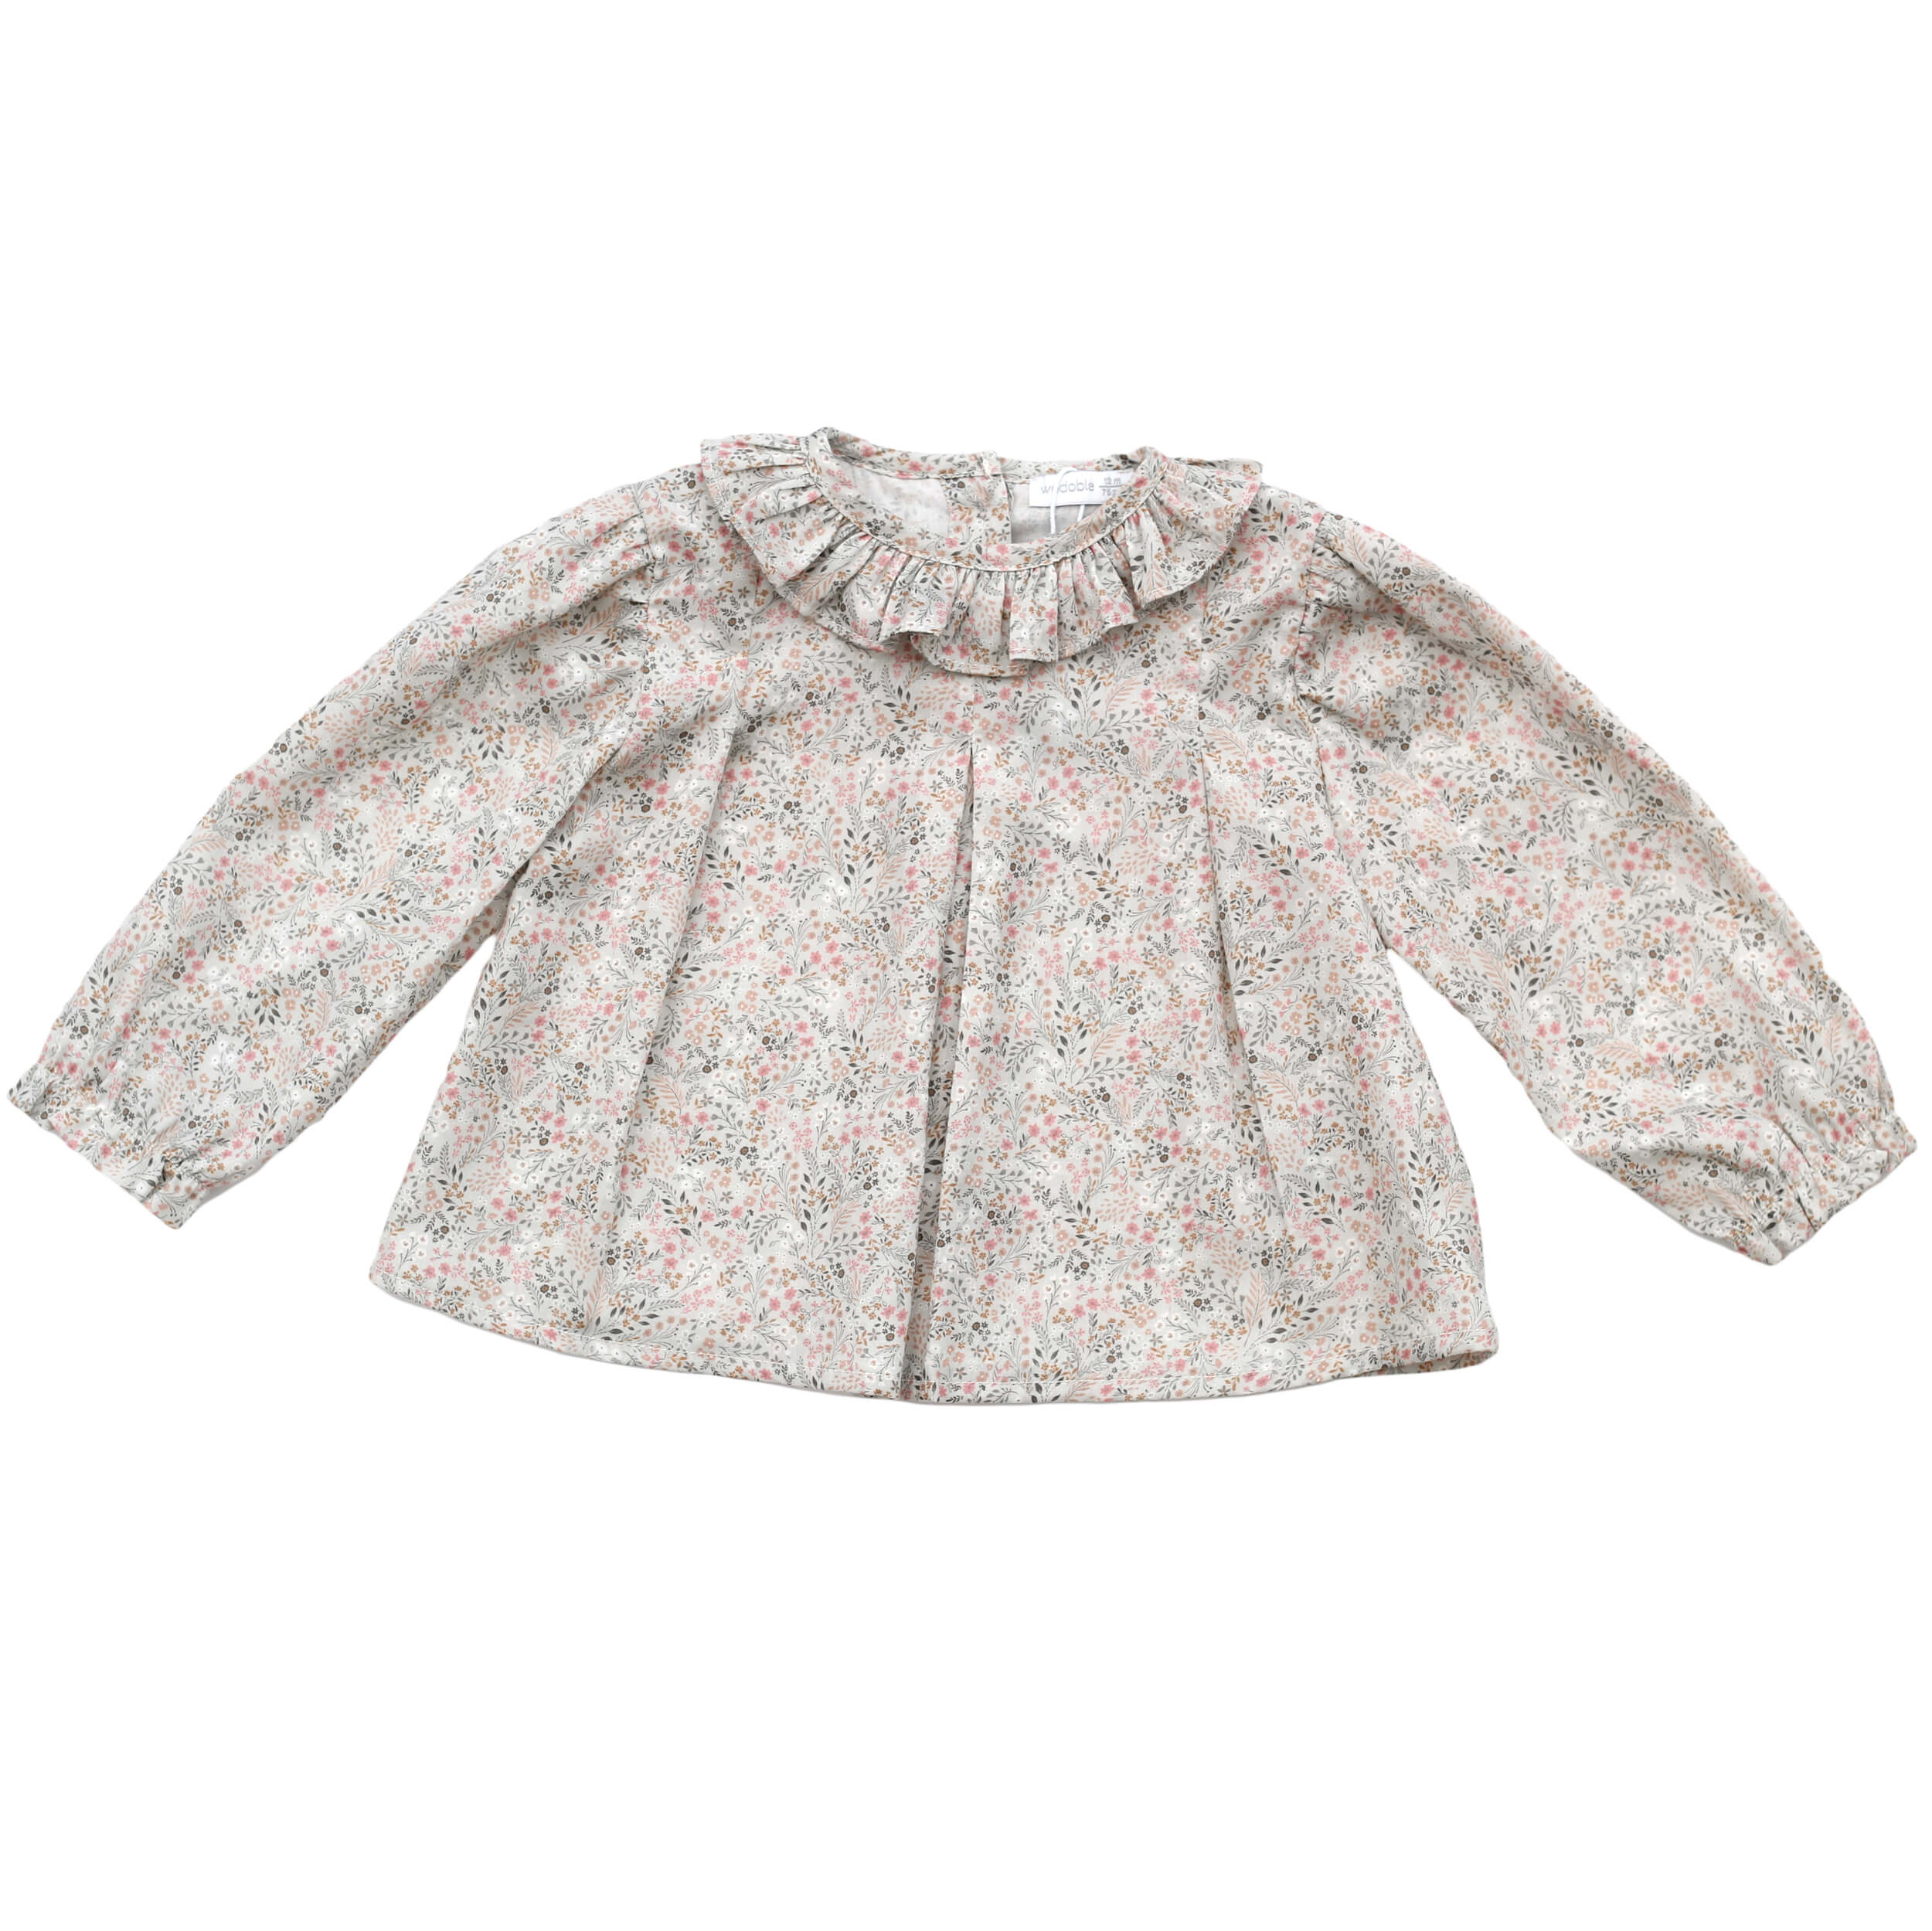 Wedoble grey floral baby blouse, made in portugal